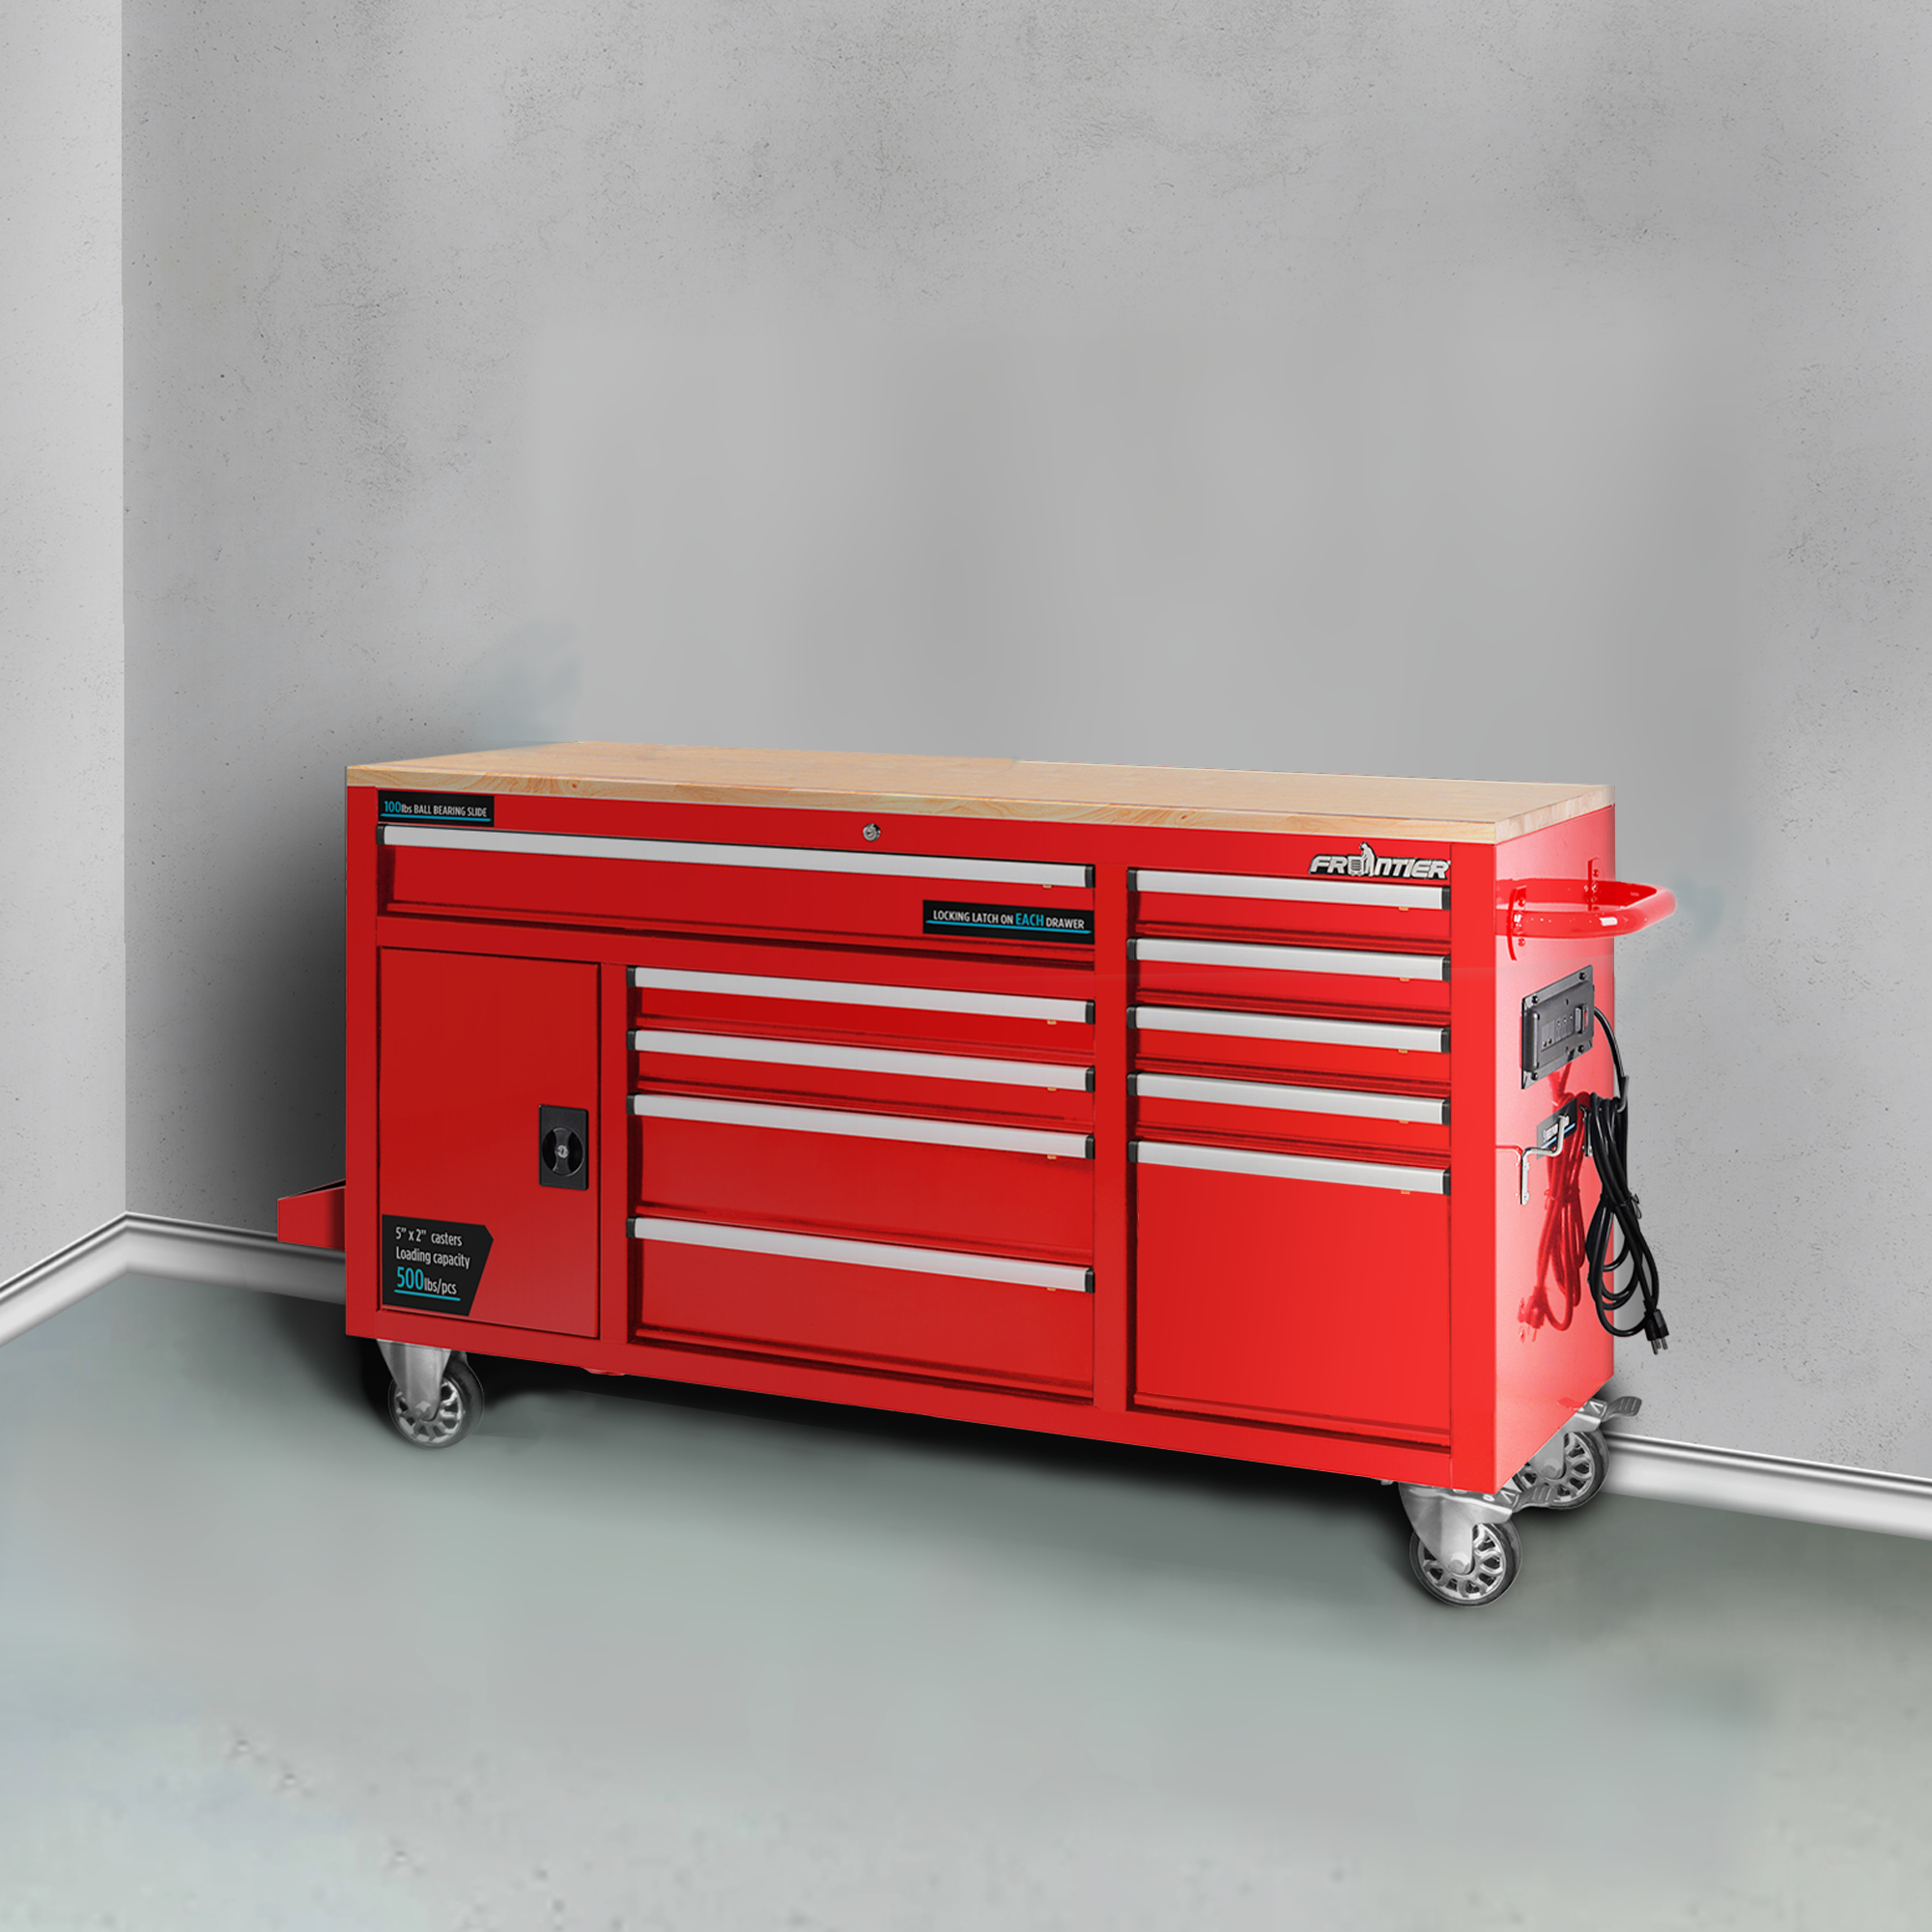 FRONTIER 62-inch W x 37-inch H x 22-inch D, Heavy Duty Mobile tool chest, tool cabinet with 10 drawers in Red - image 4 of 4